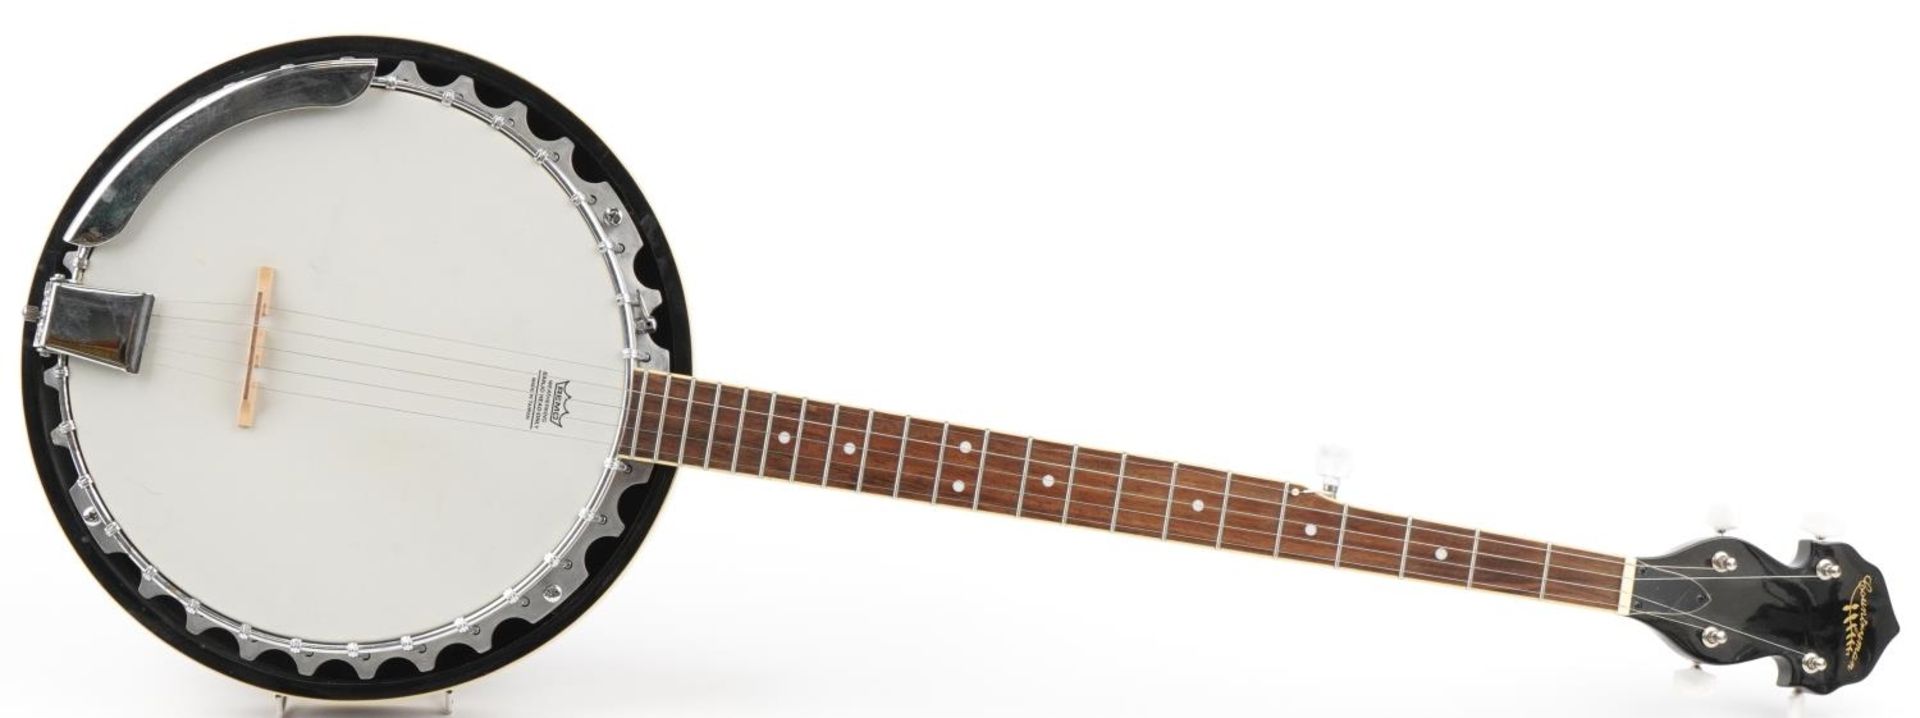 Countryman banjo-Remo Weather King, 98cm in length